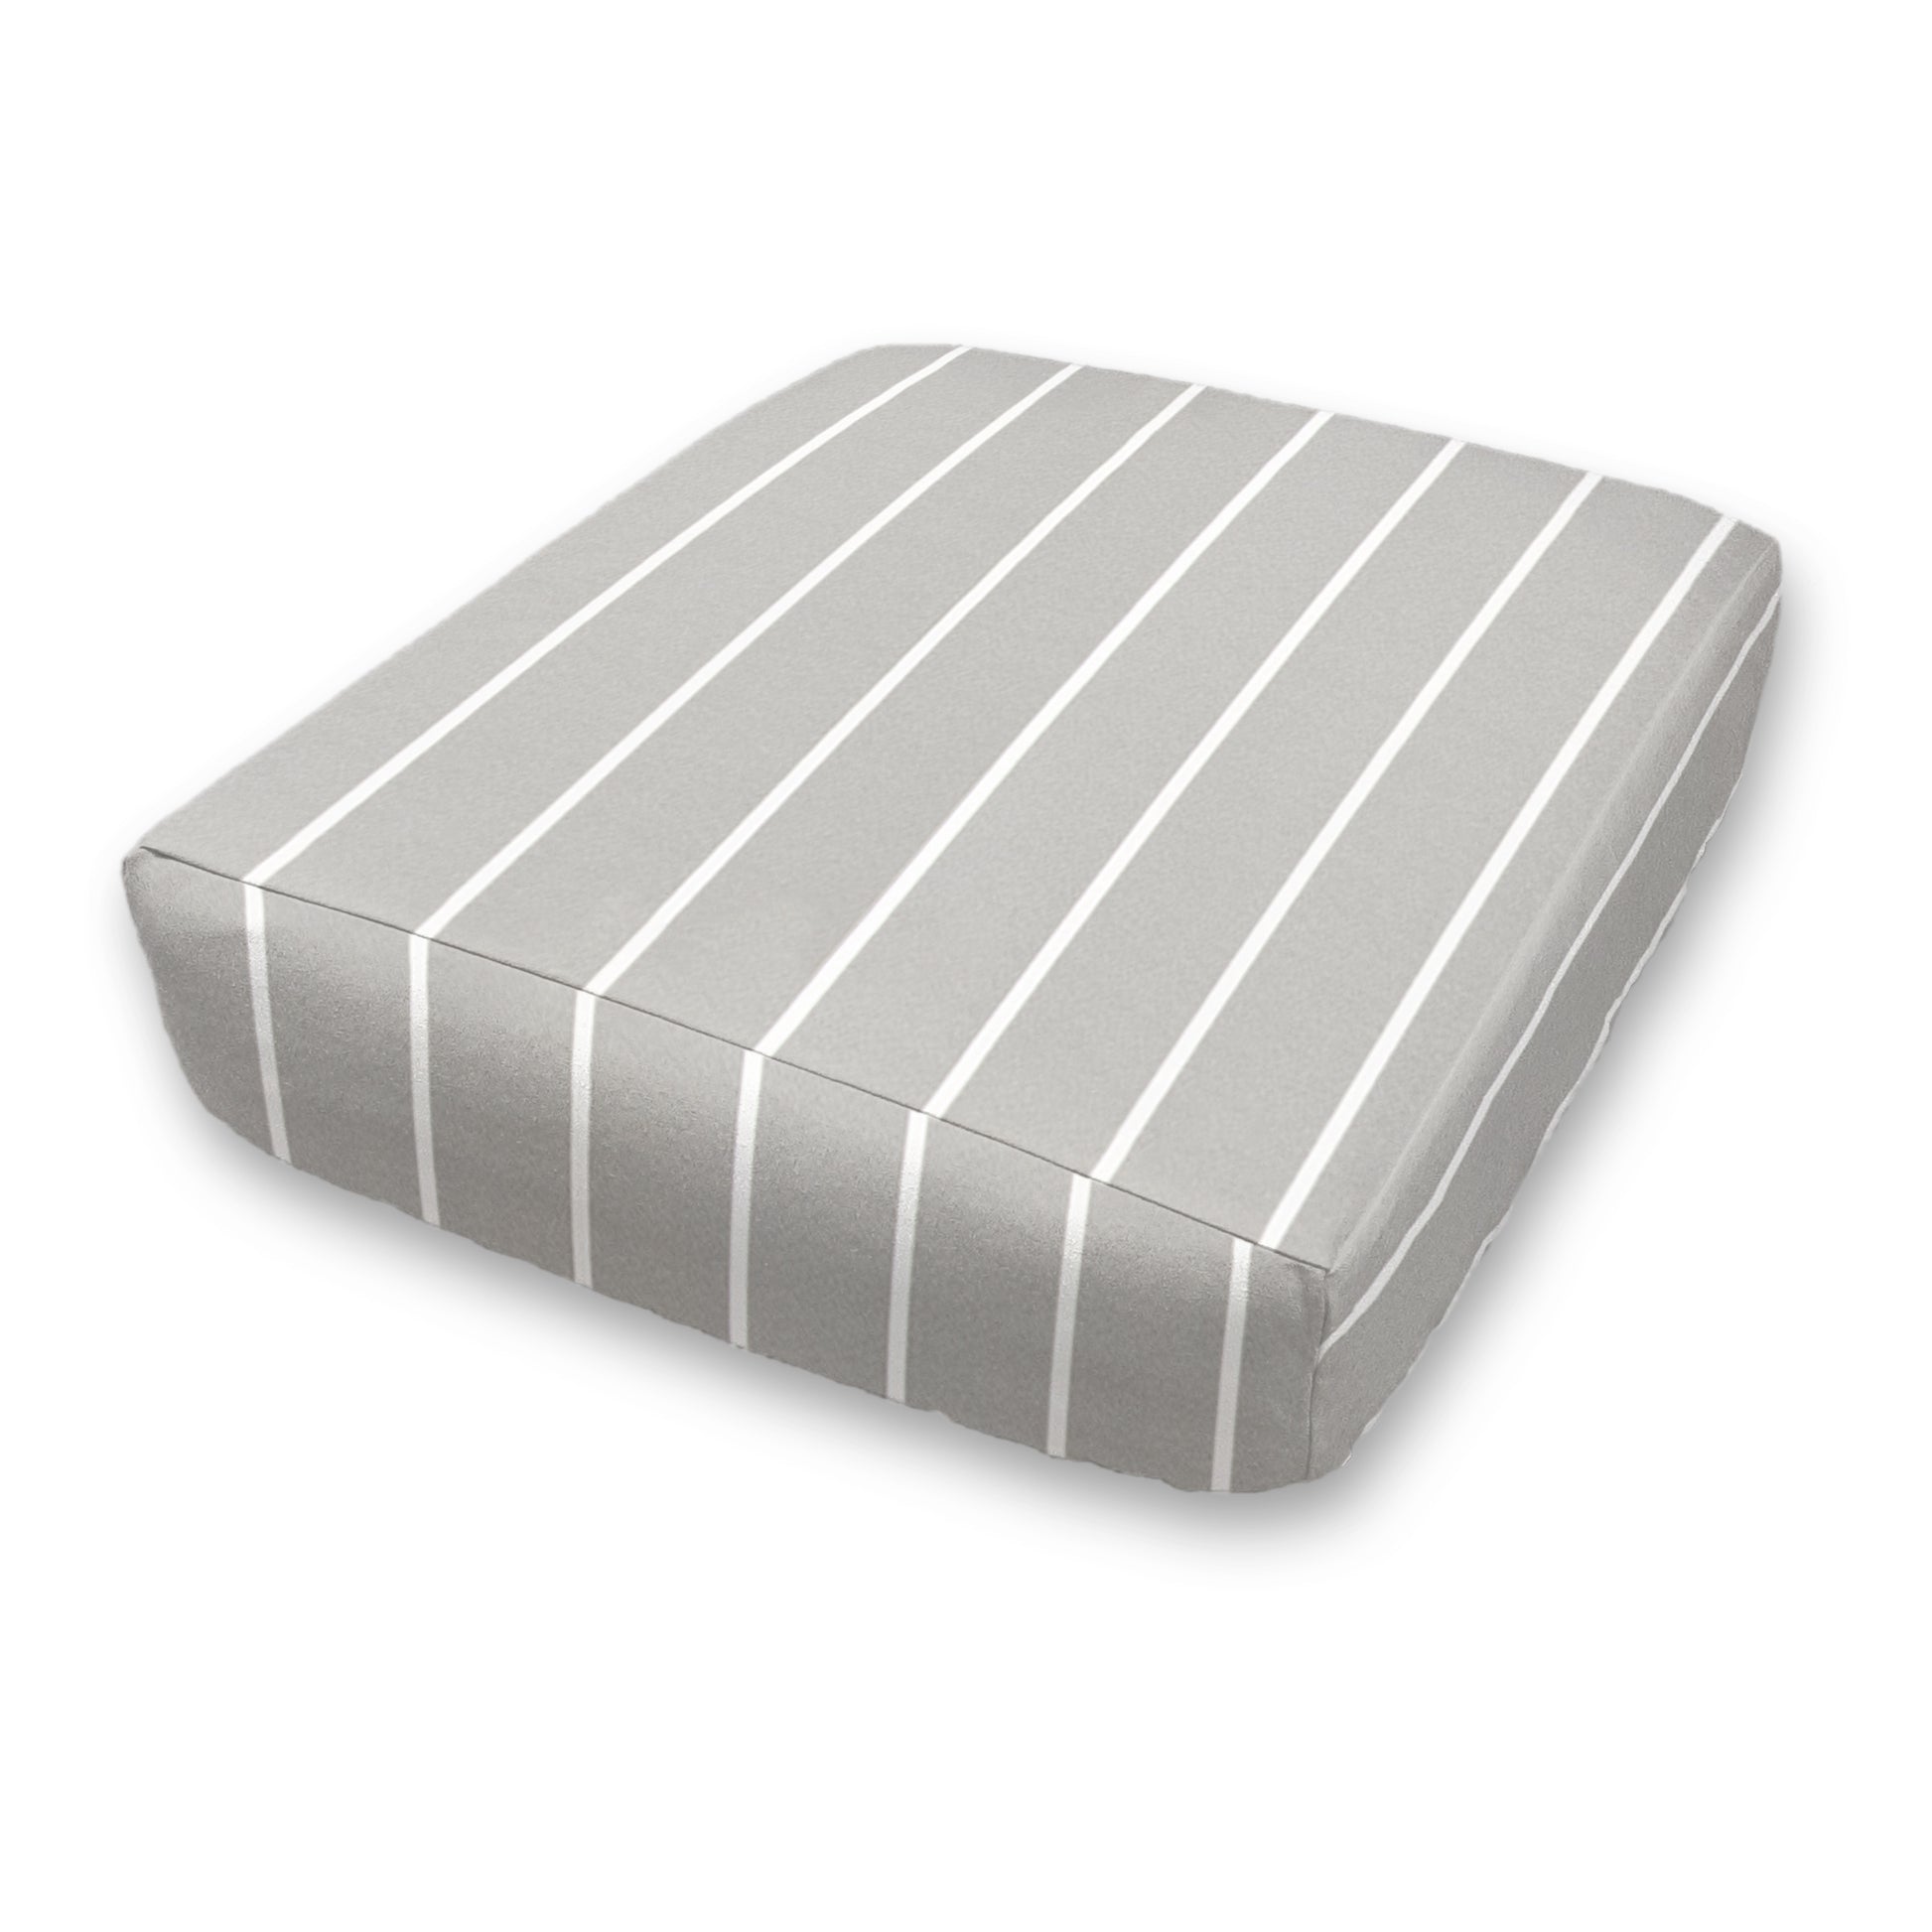 Windridge Thin Stripes Custom Water Resistant Elastic Fitted & Protective Cushion Cover - Choice of Color